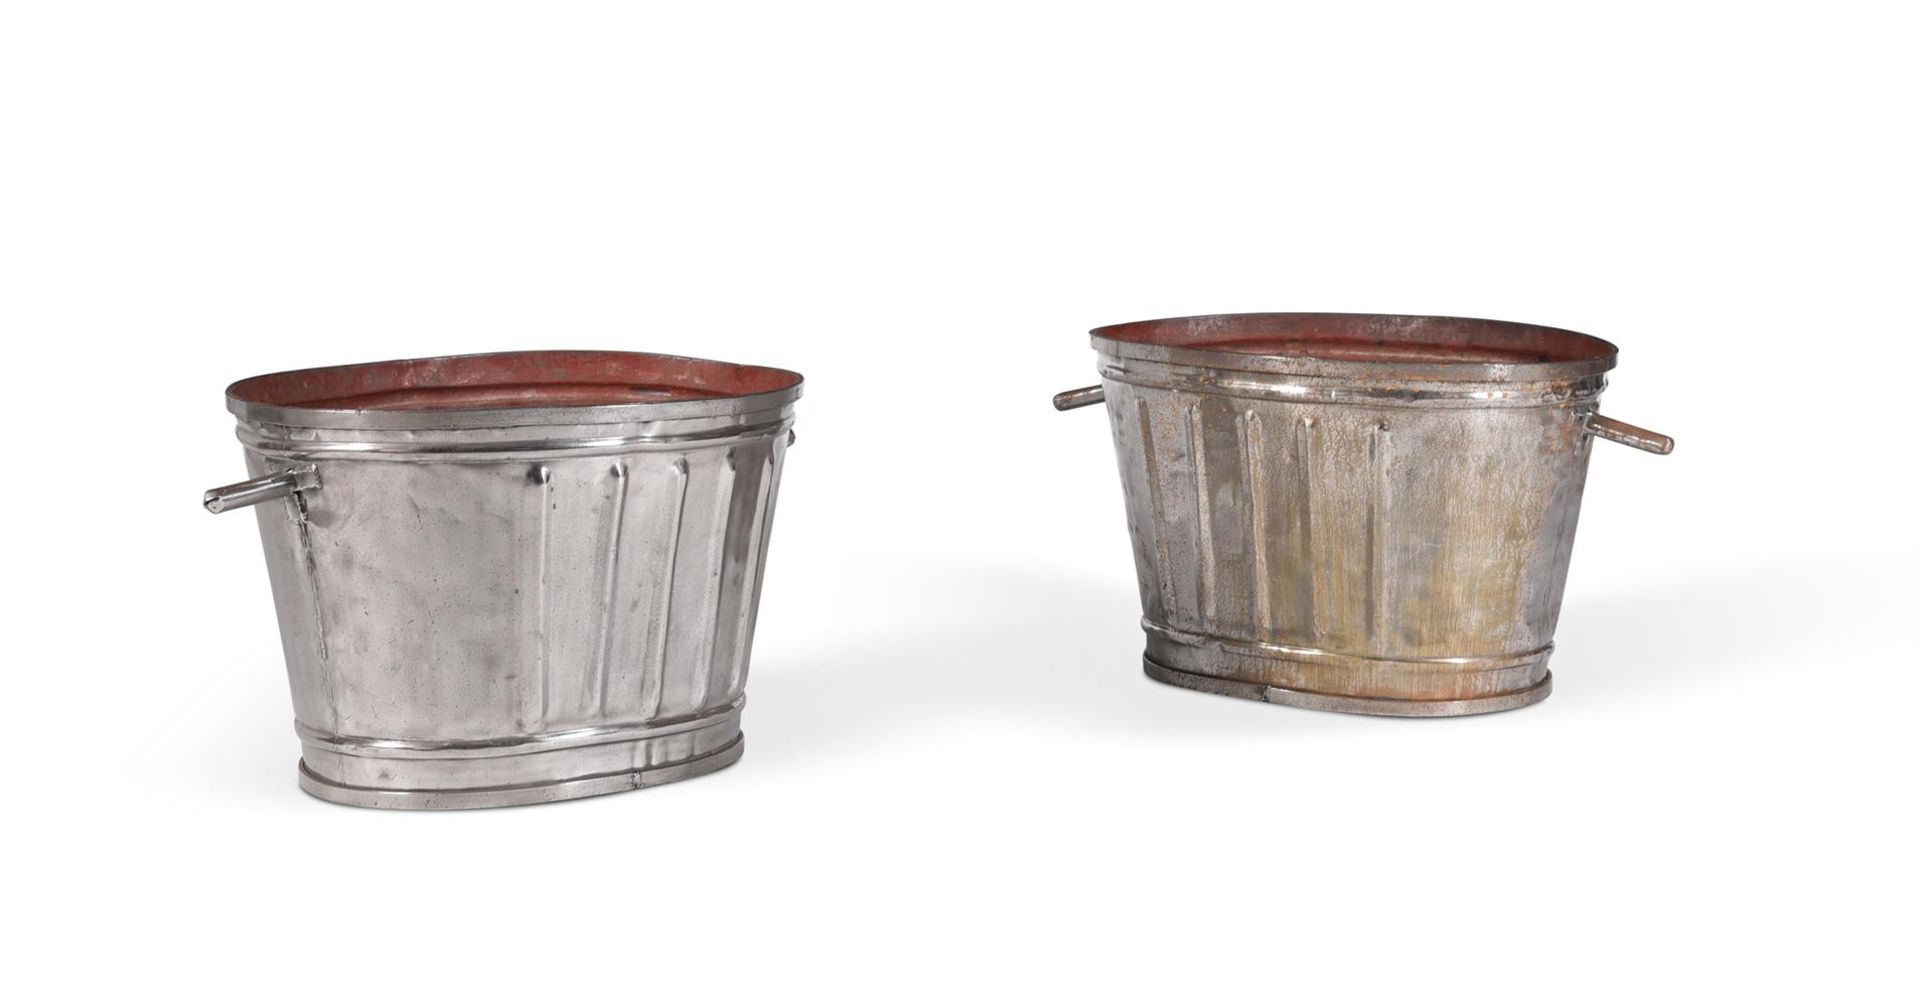 A PAIR OF FRENCH METAL WINE COOLERS OR LOG BINS, 20TH CENTURY